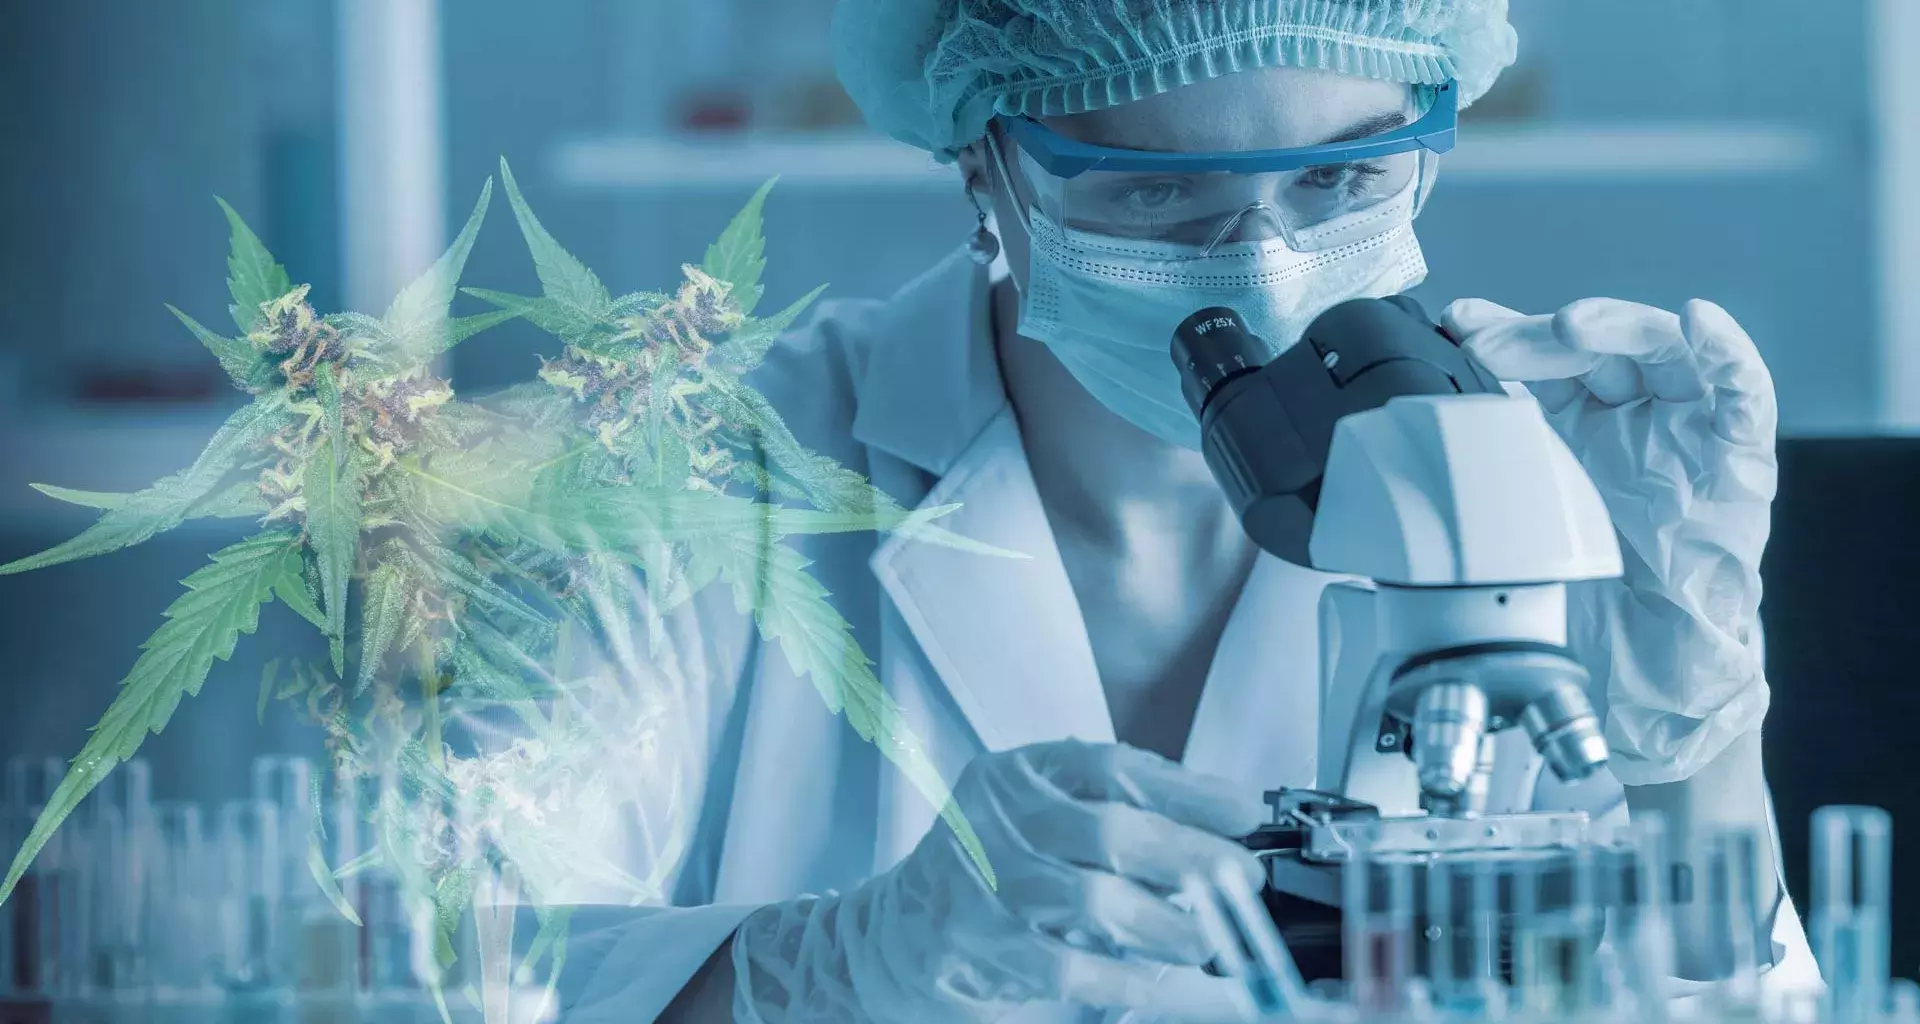 TecSalud conducting first CBD study to treat COVID after-effects